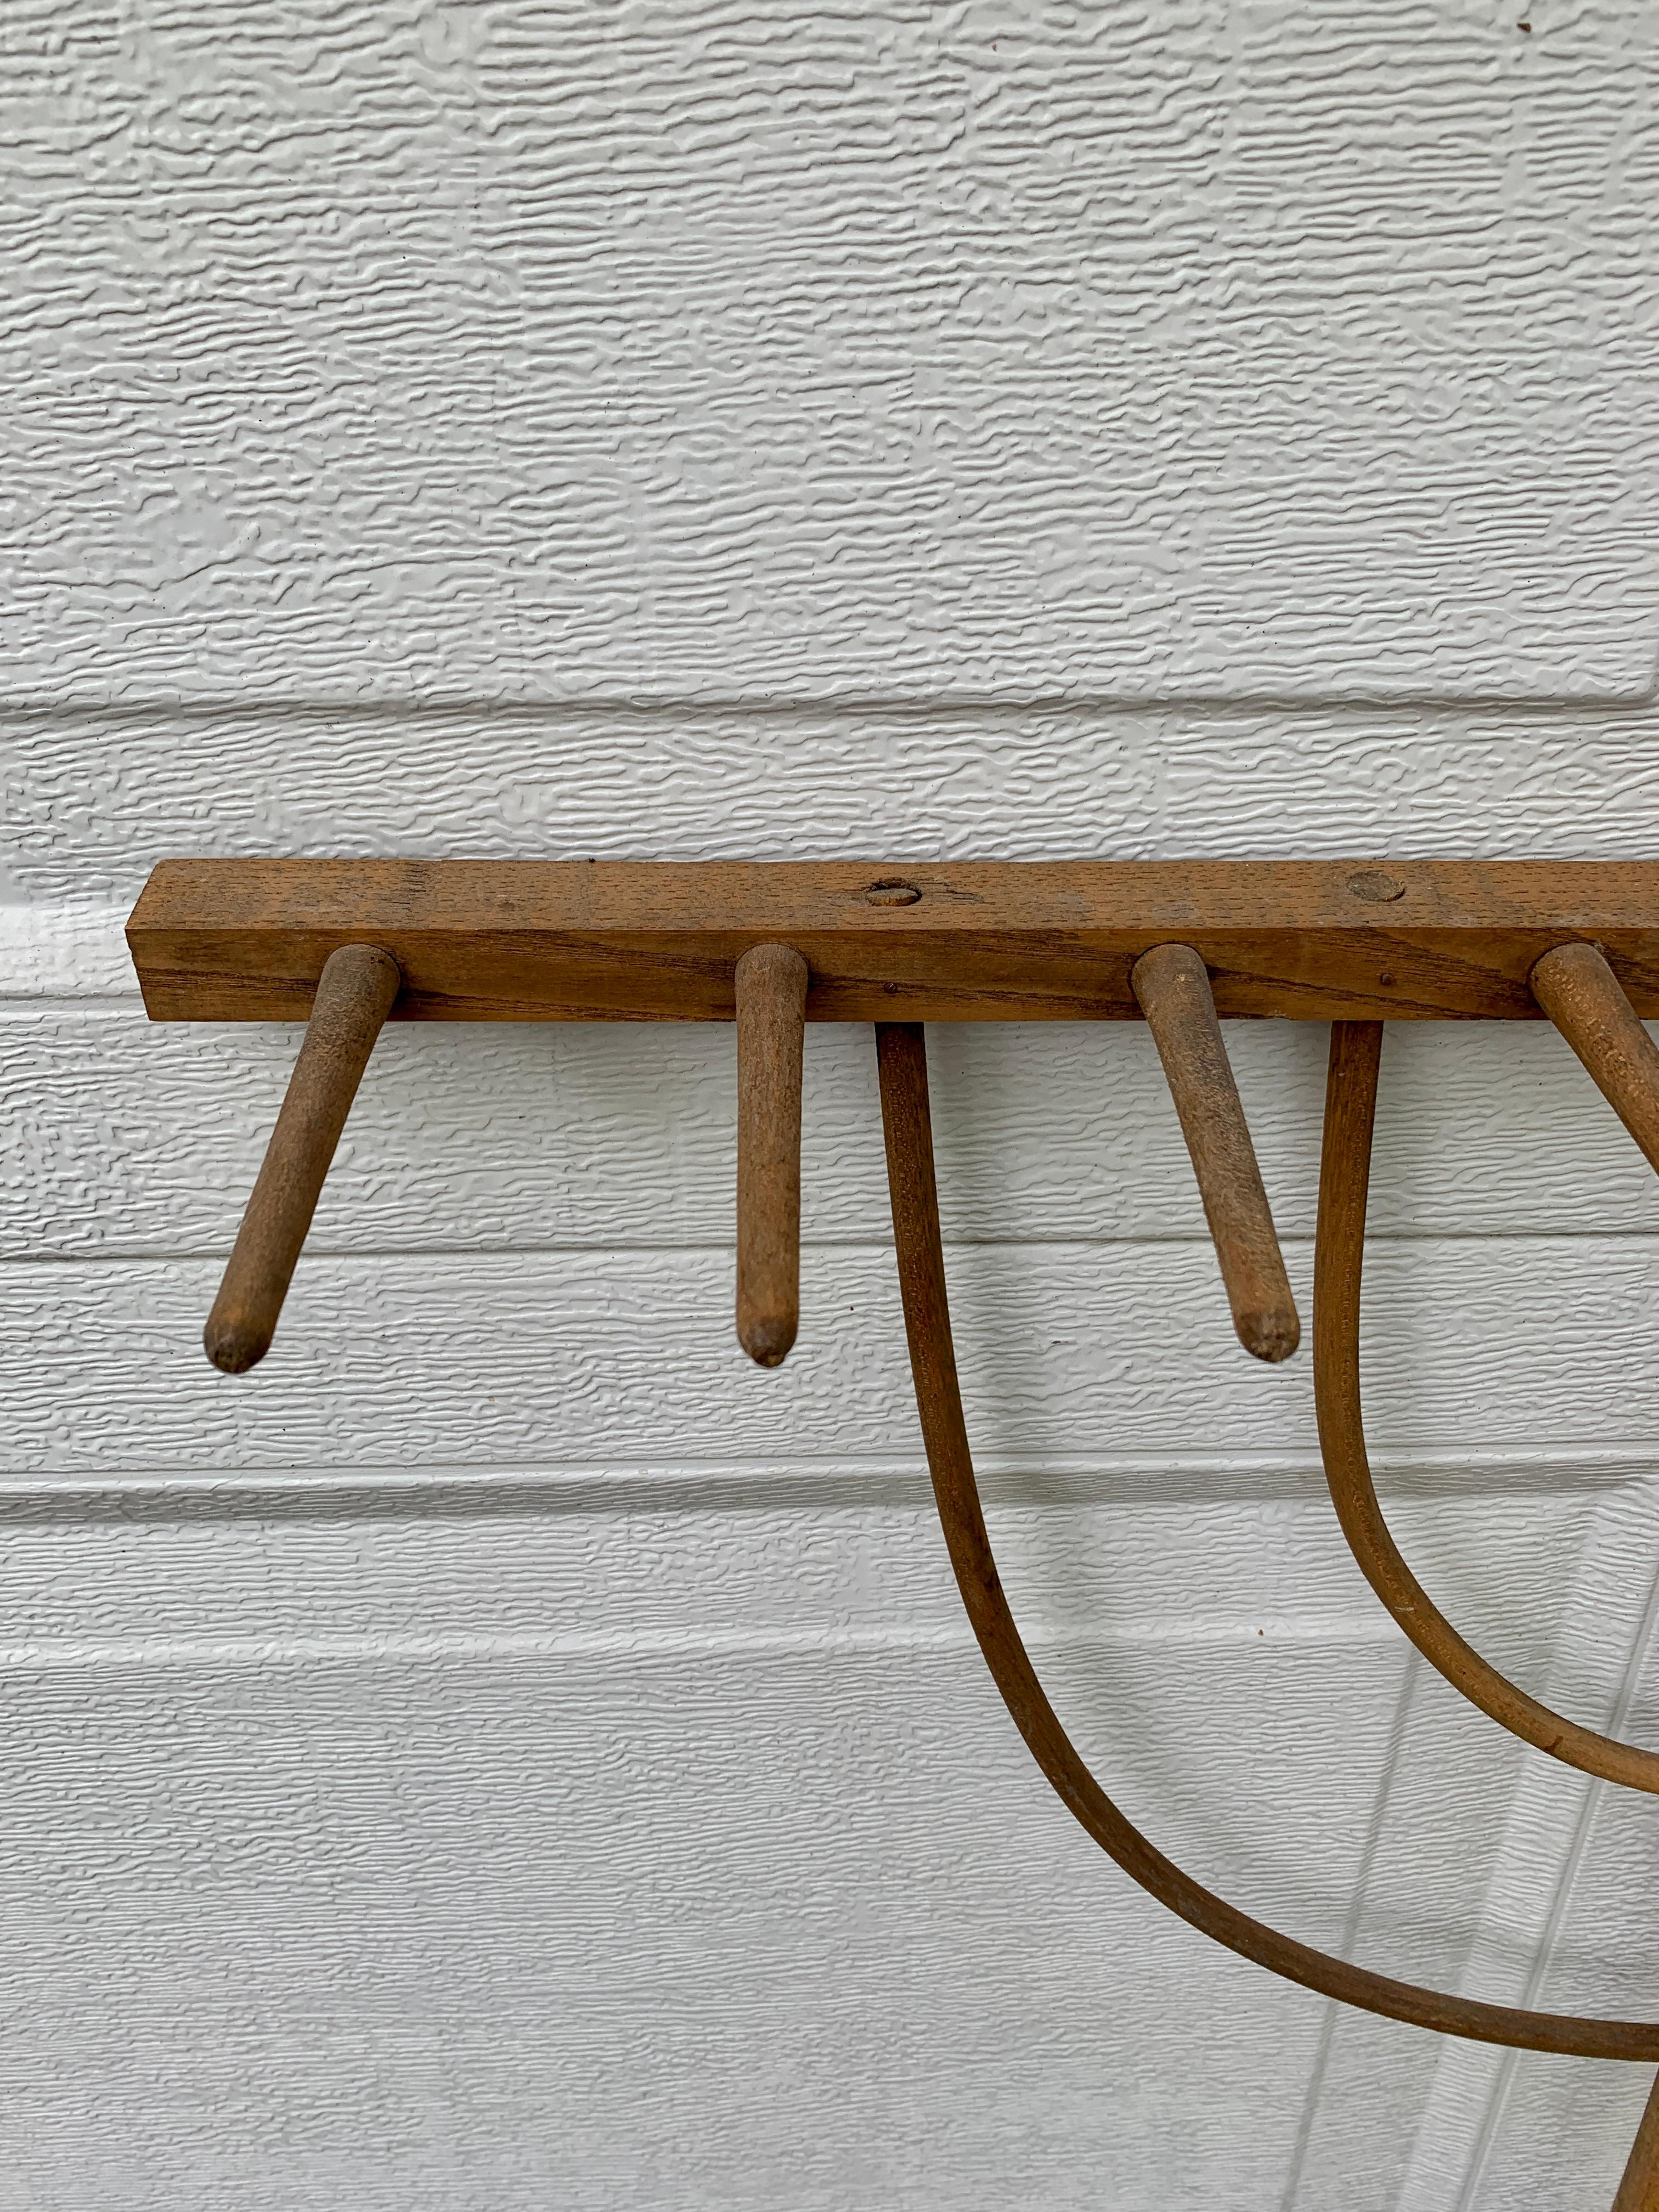 American Antique Early 20th Century Hand Made Wooden Hay Rake For Sale